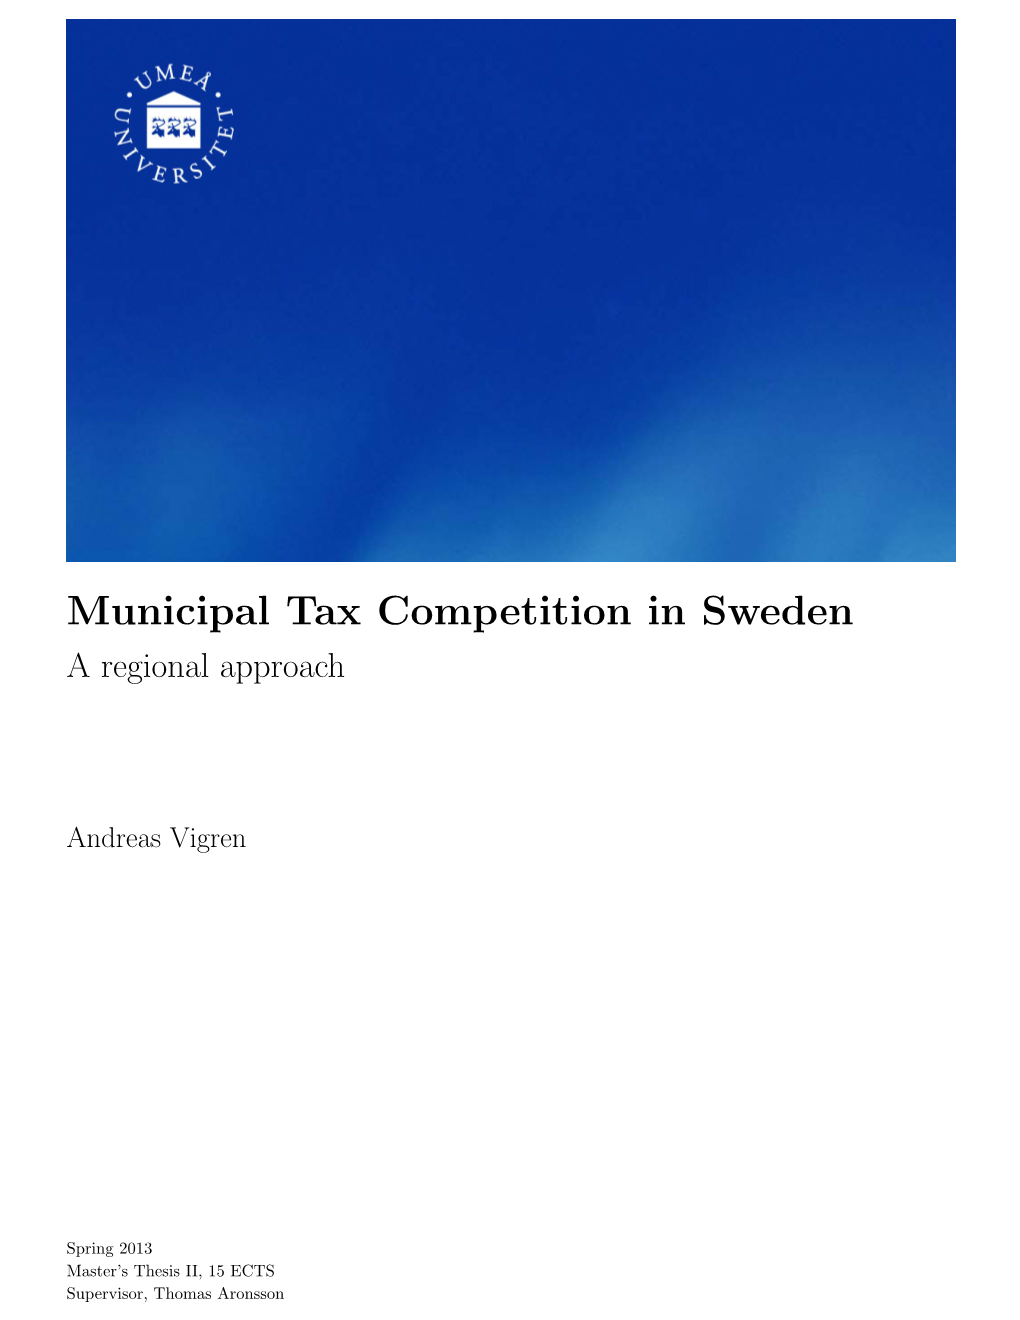 Municipal Tax Competition in Sweden a Regional Approach